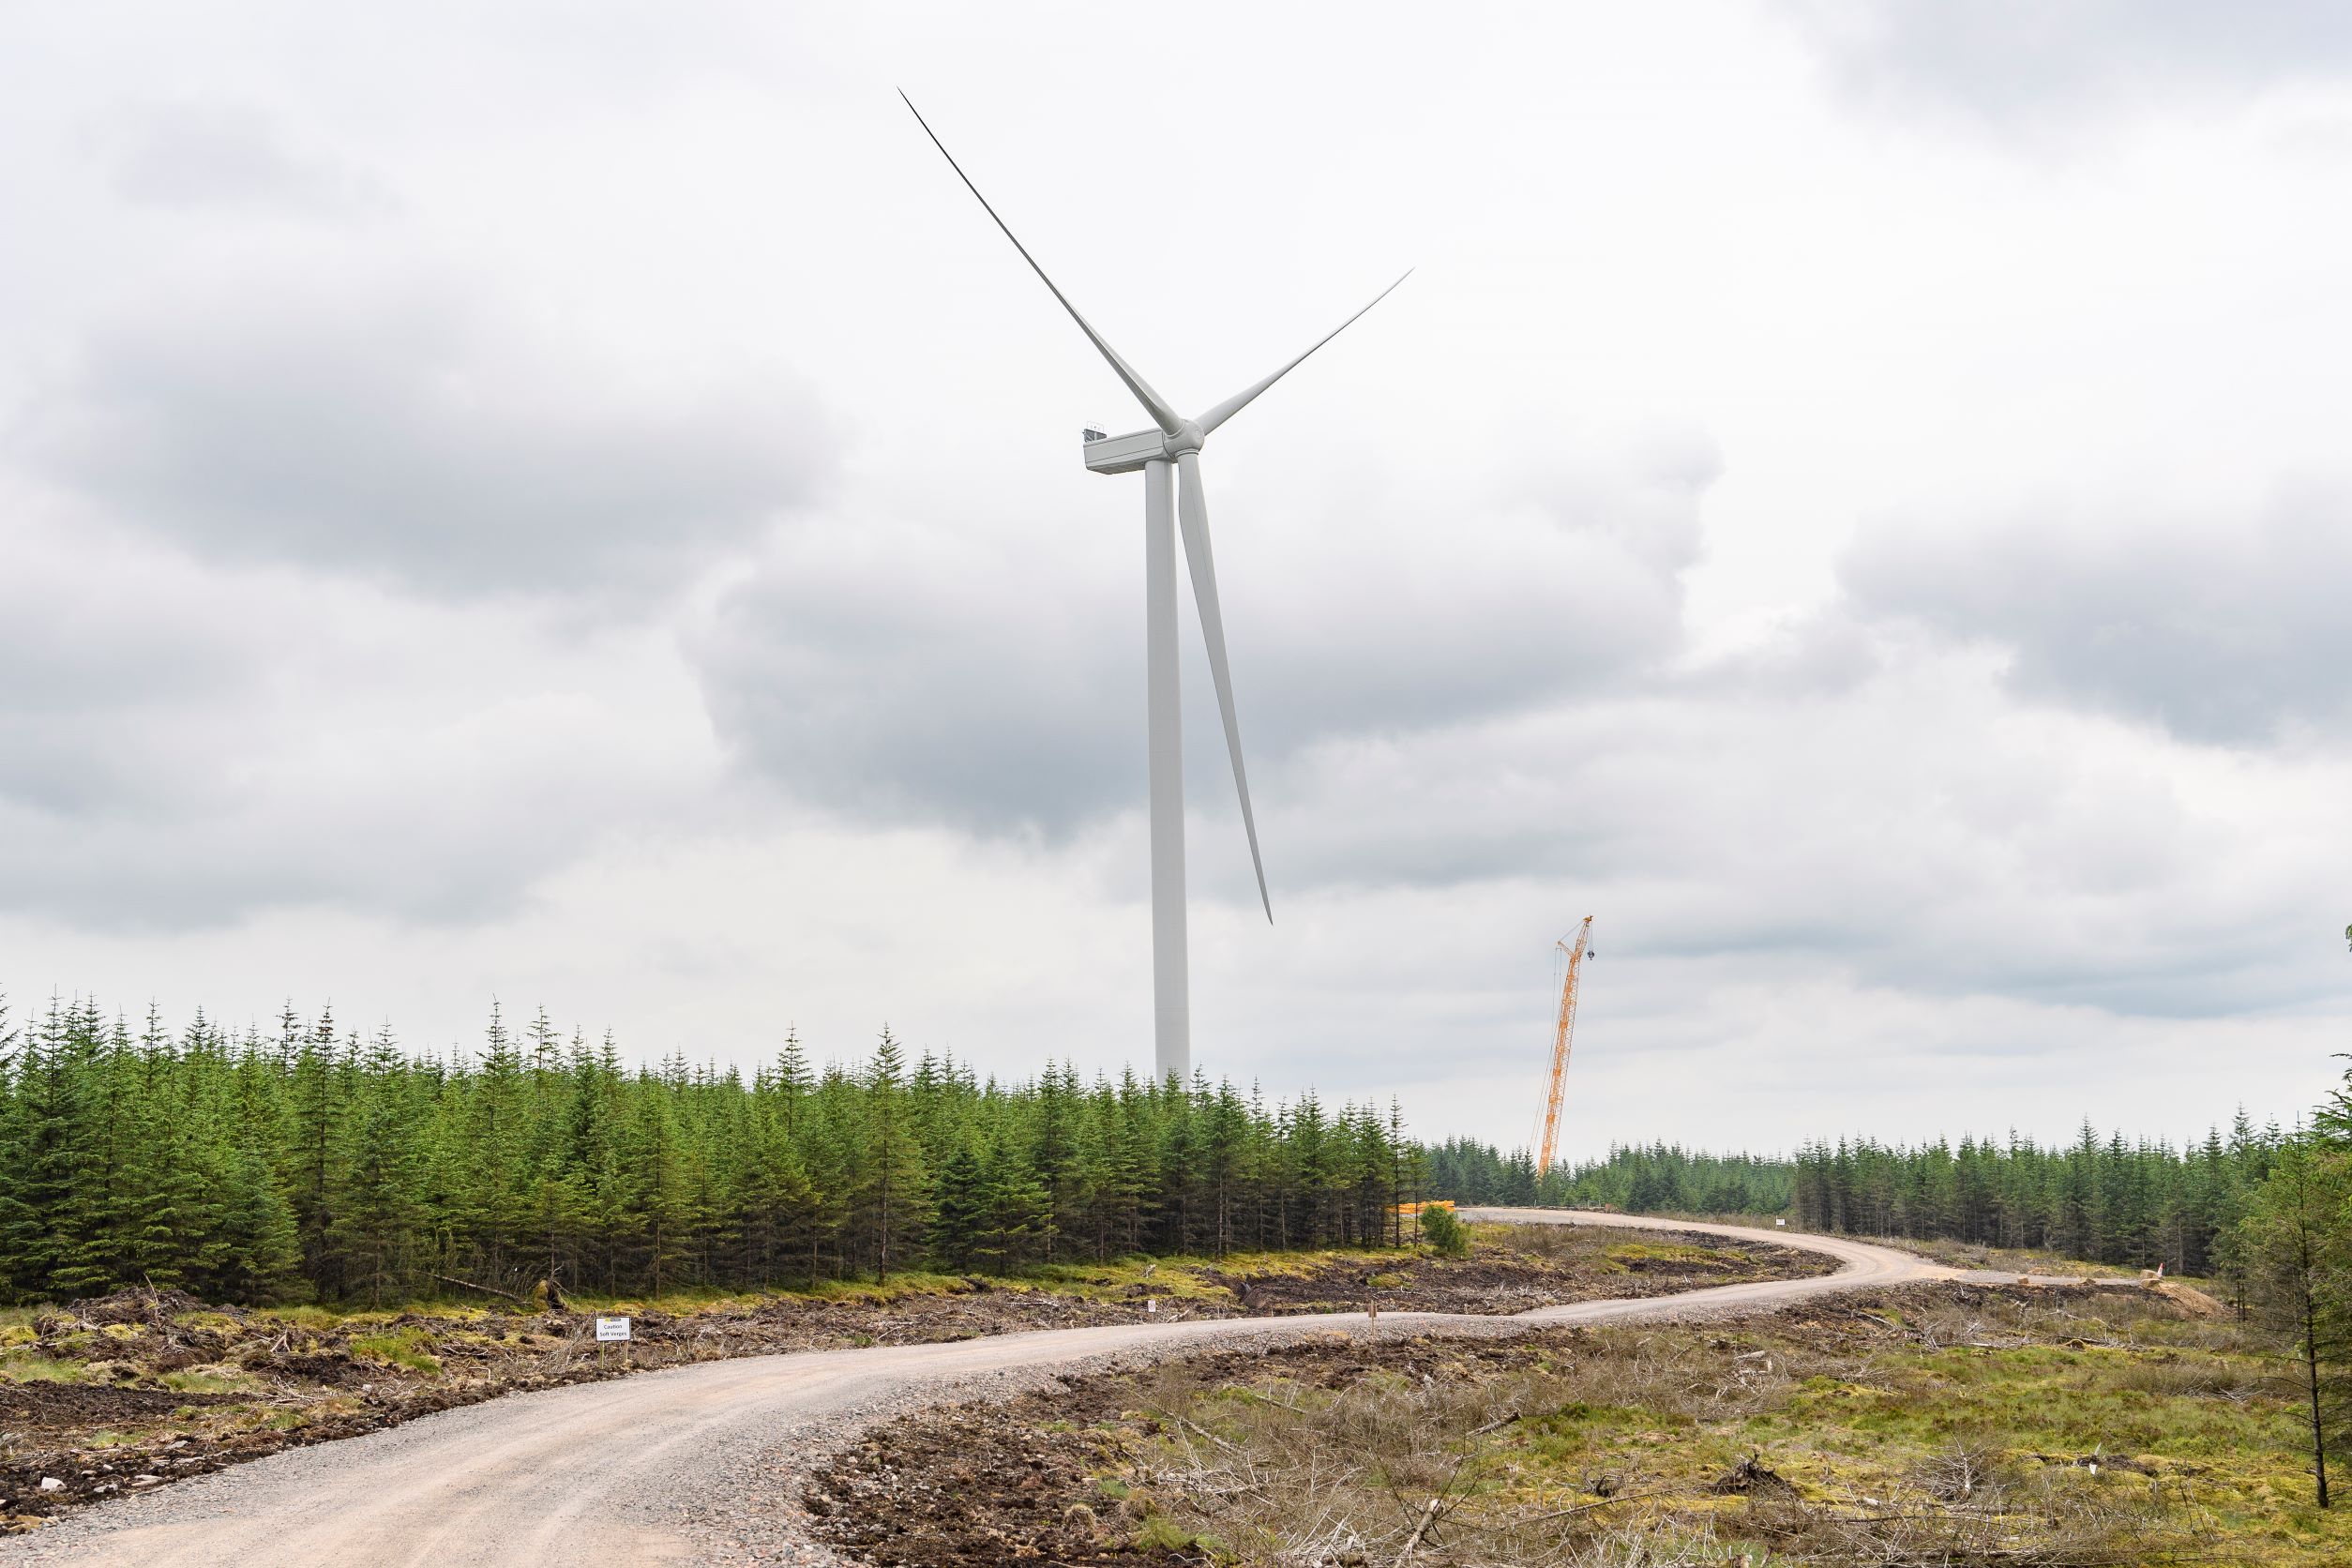 First turbine installed at Kype Muir wind farm extension